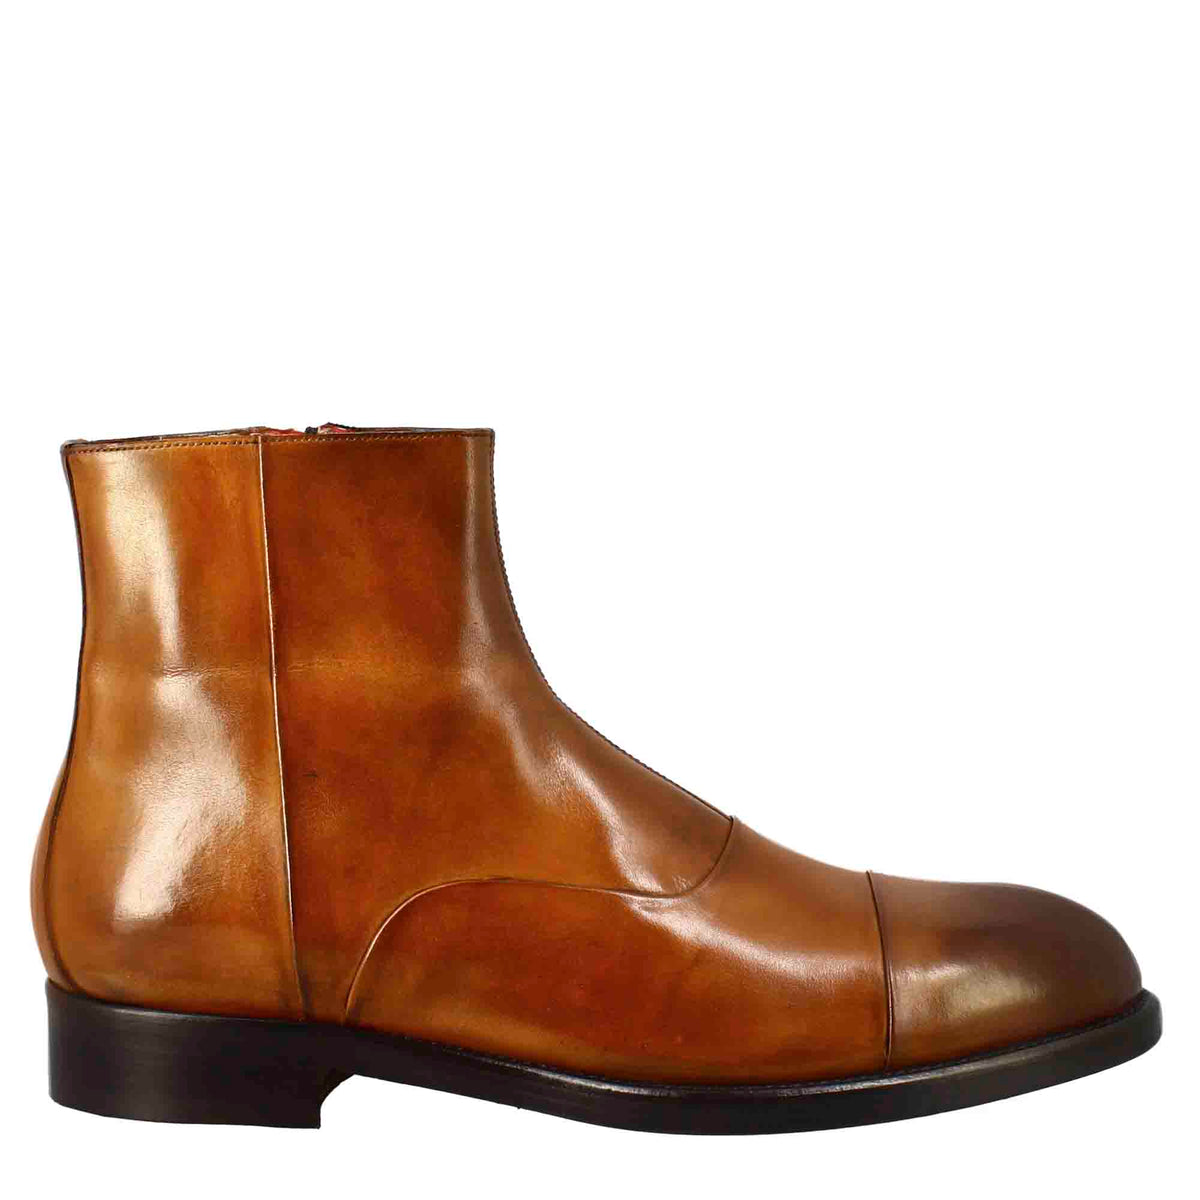 Men's ankle boot in light brown leather with zip closure